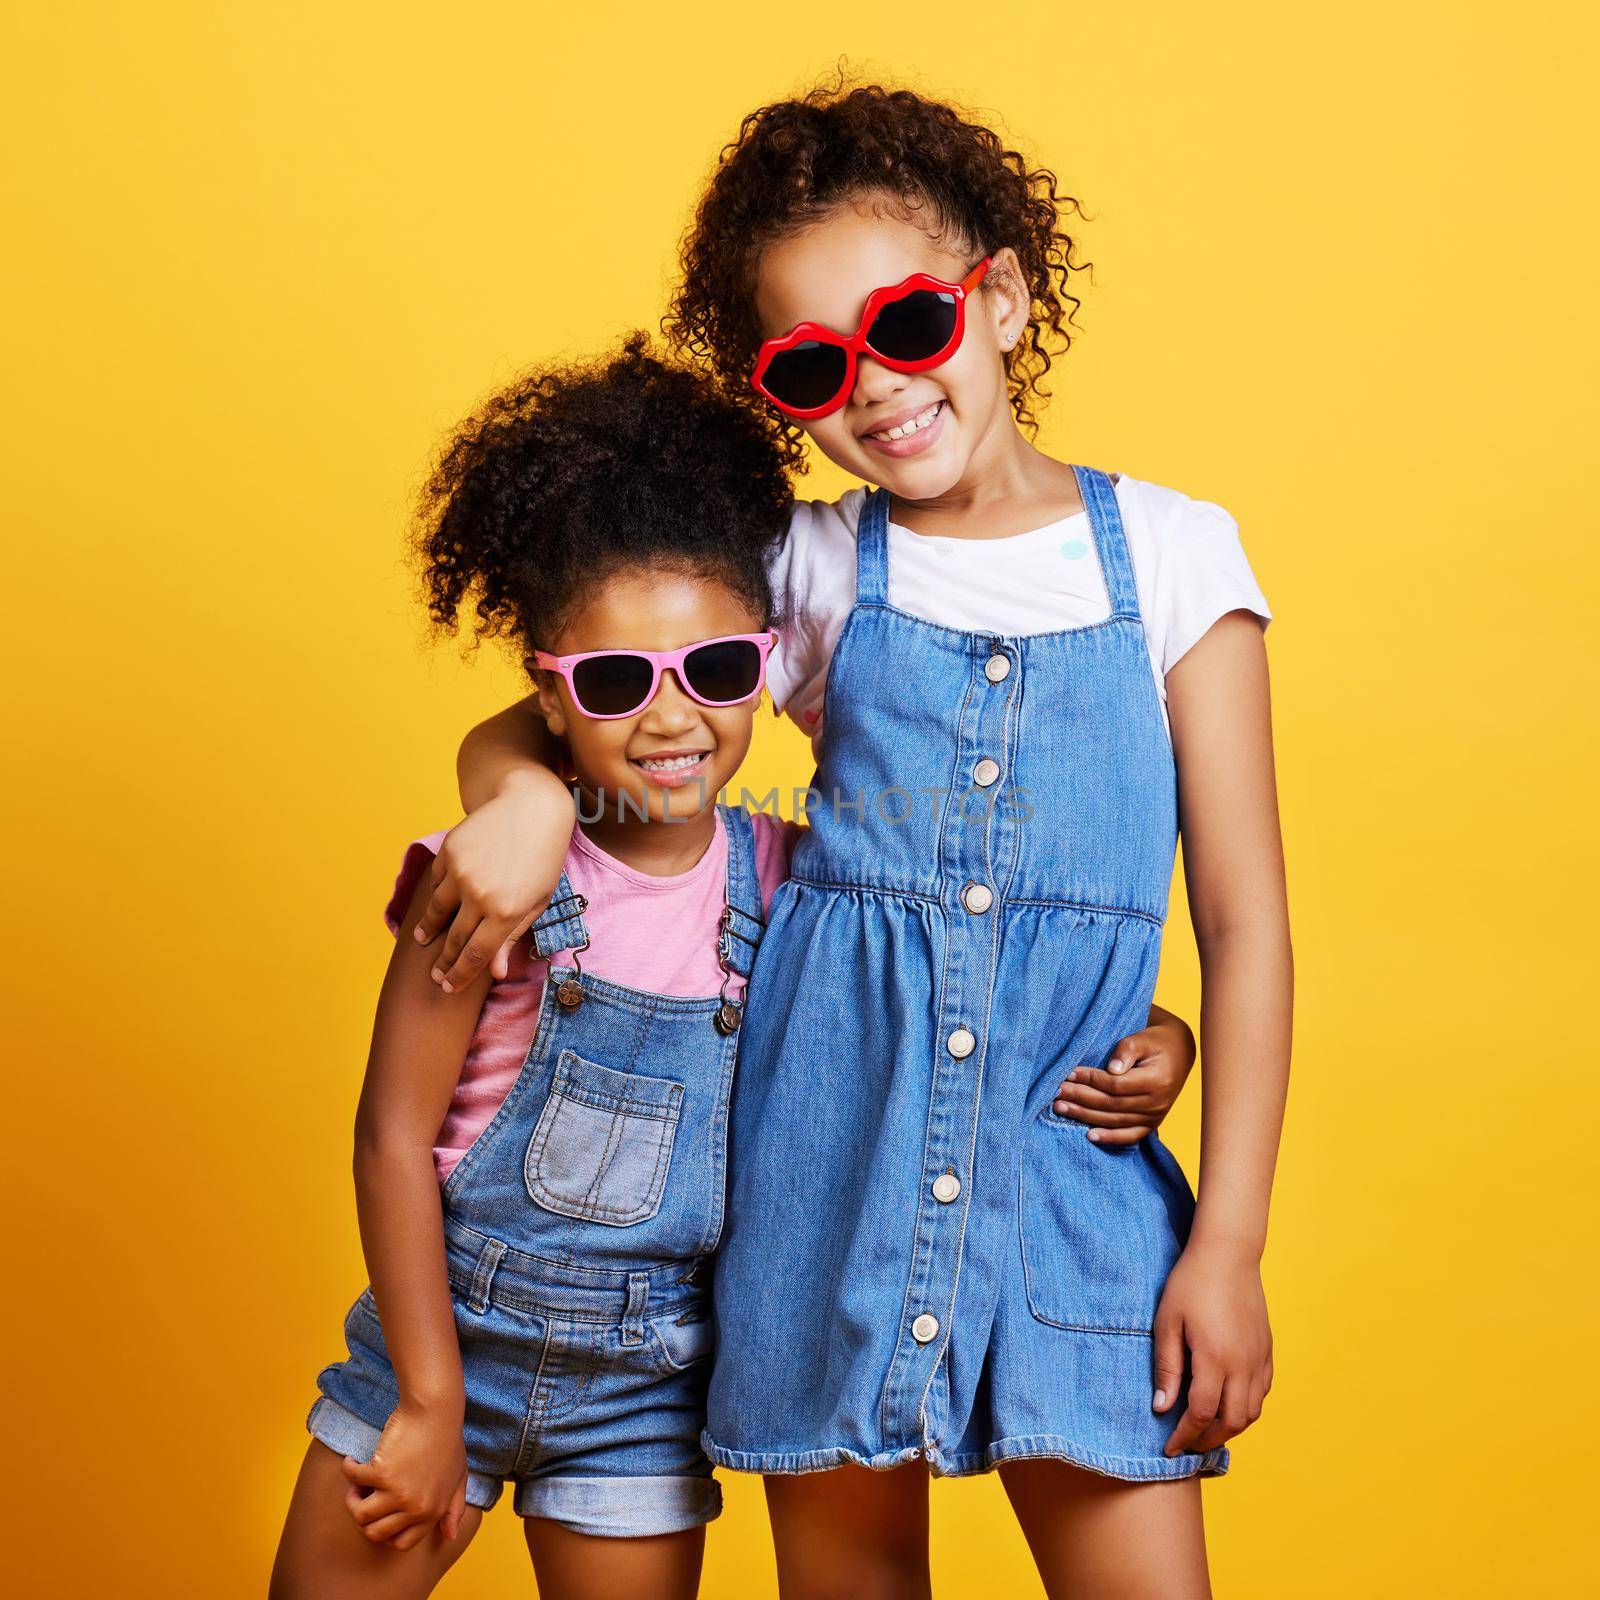 Studio portrait two mixed race girl sisters wearing funky sunglasses Isolated against a yellow background. Cute hispanic children posing inside. Happy and carefree kids imagining being fashion models by YuriArcurs